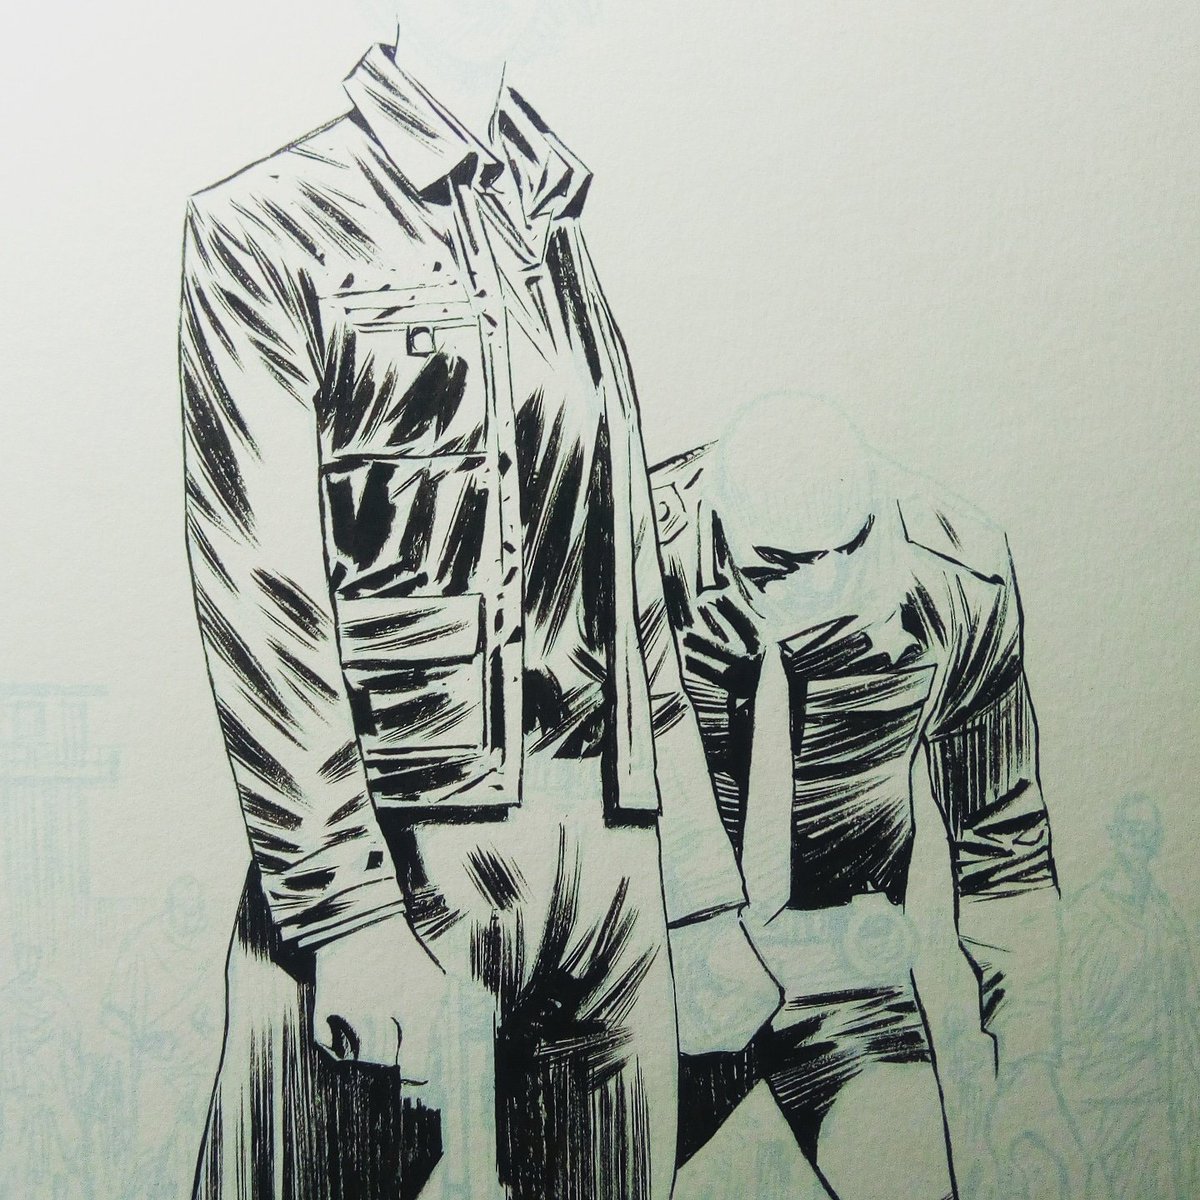 Inking a new cover... @ishmahab #johnarcudi #darkhorse #deadinside #cover #blackandwhite #specialedition #systemcomics #lindacaruso #detective #prison #prisonguards #sheriff #jacket #inks #serbianedition